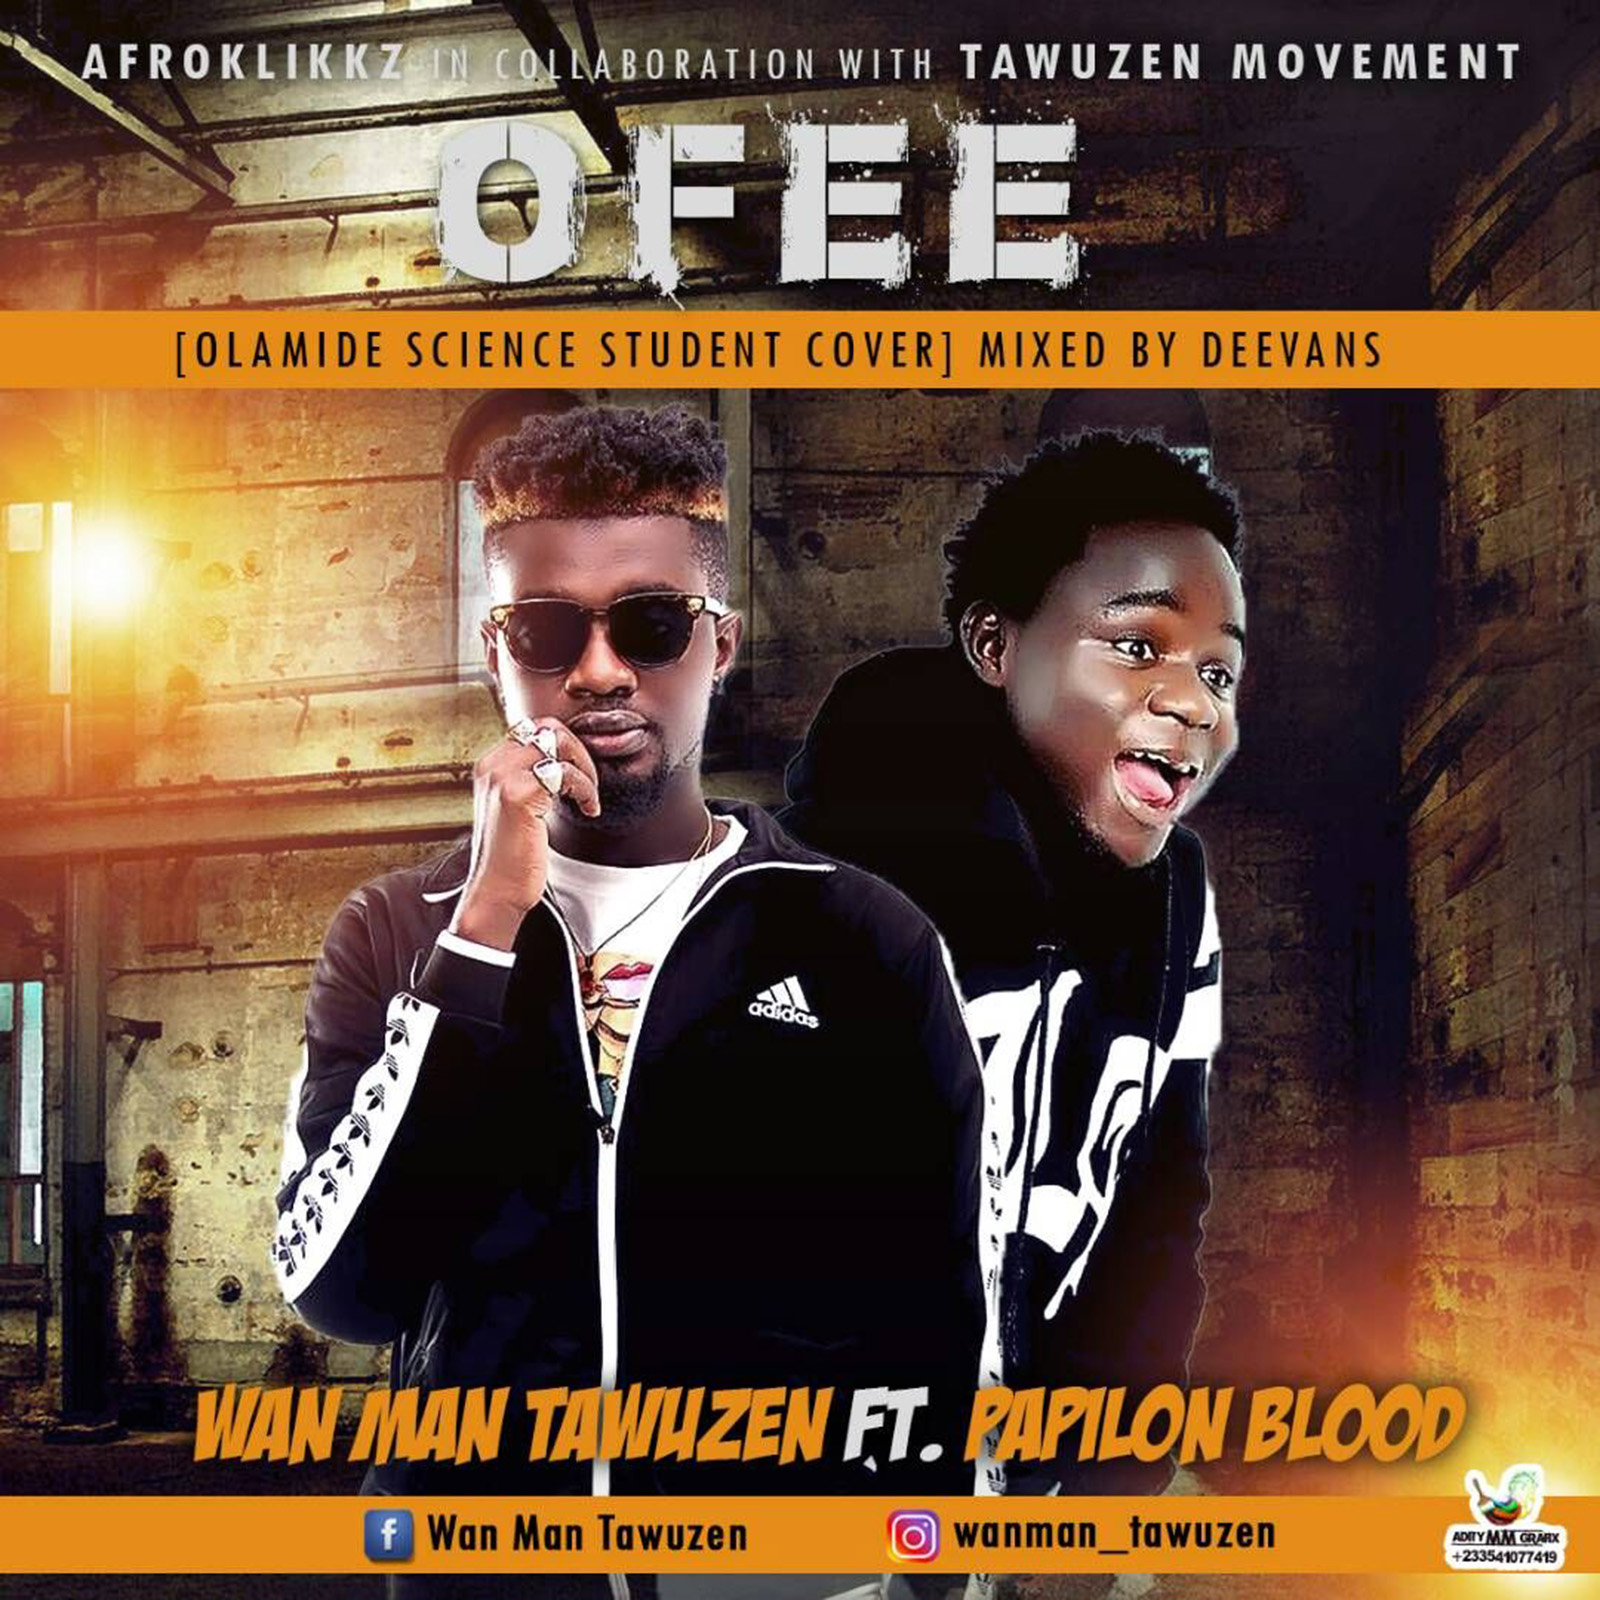 Ofee (Olamide Science Student Cover) by Wan Man Tawuzen feat. Papilon Blood